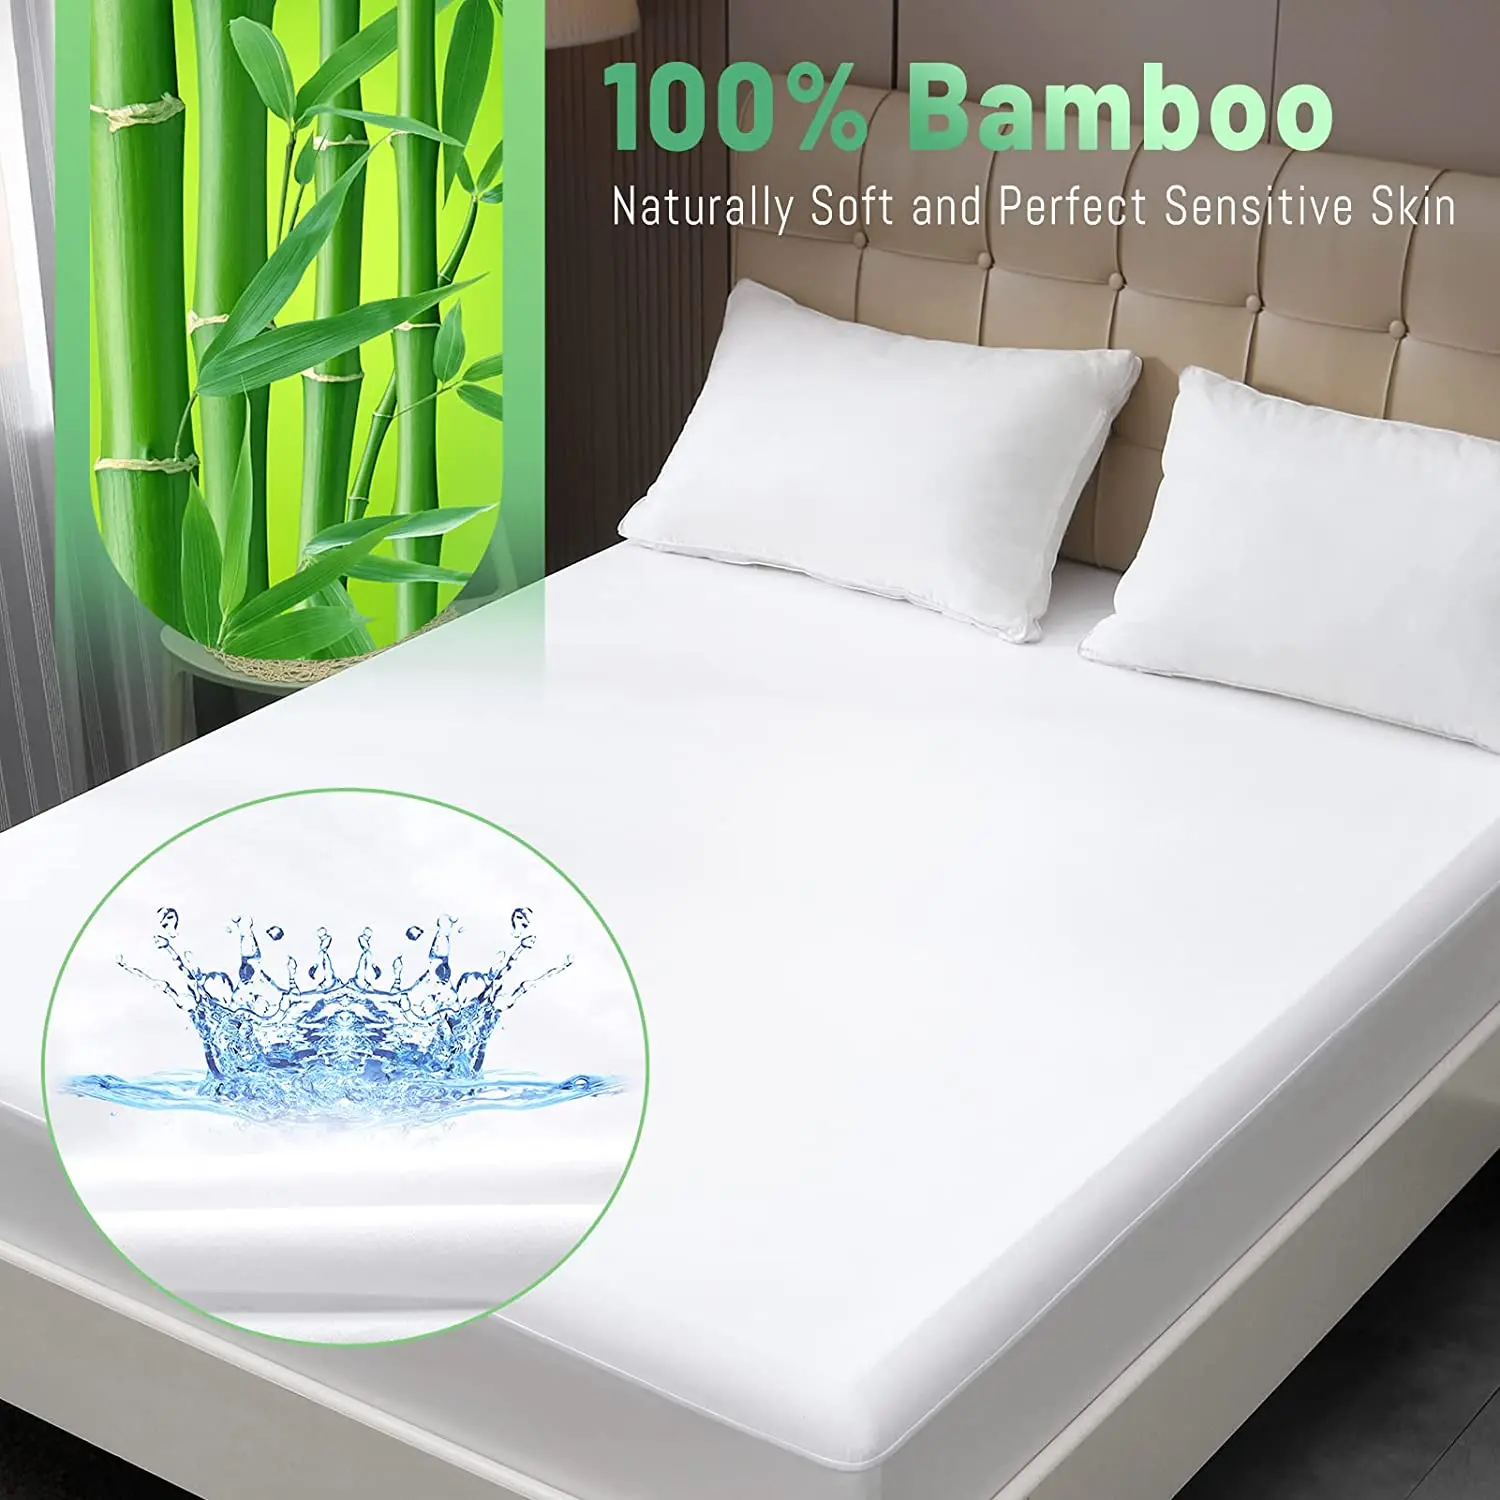 King Size Mattress Protector Waterproof Bamboo Cover Bed Washable Dust Mite Bug 